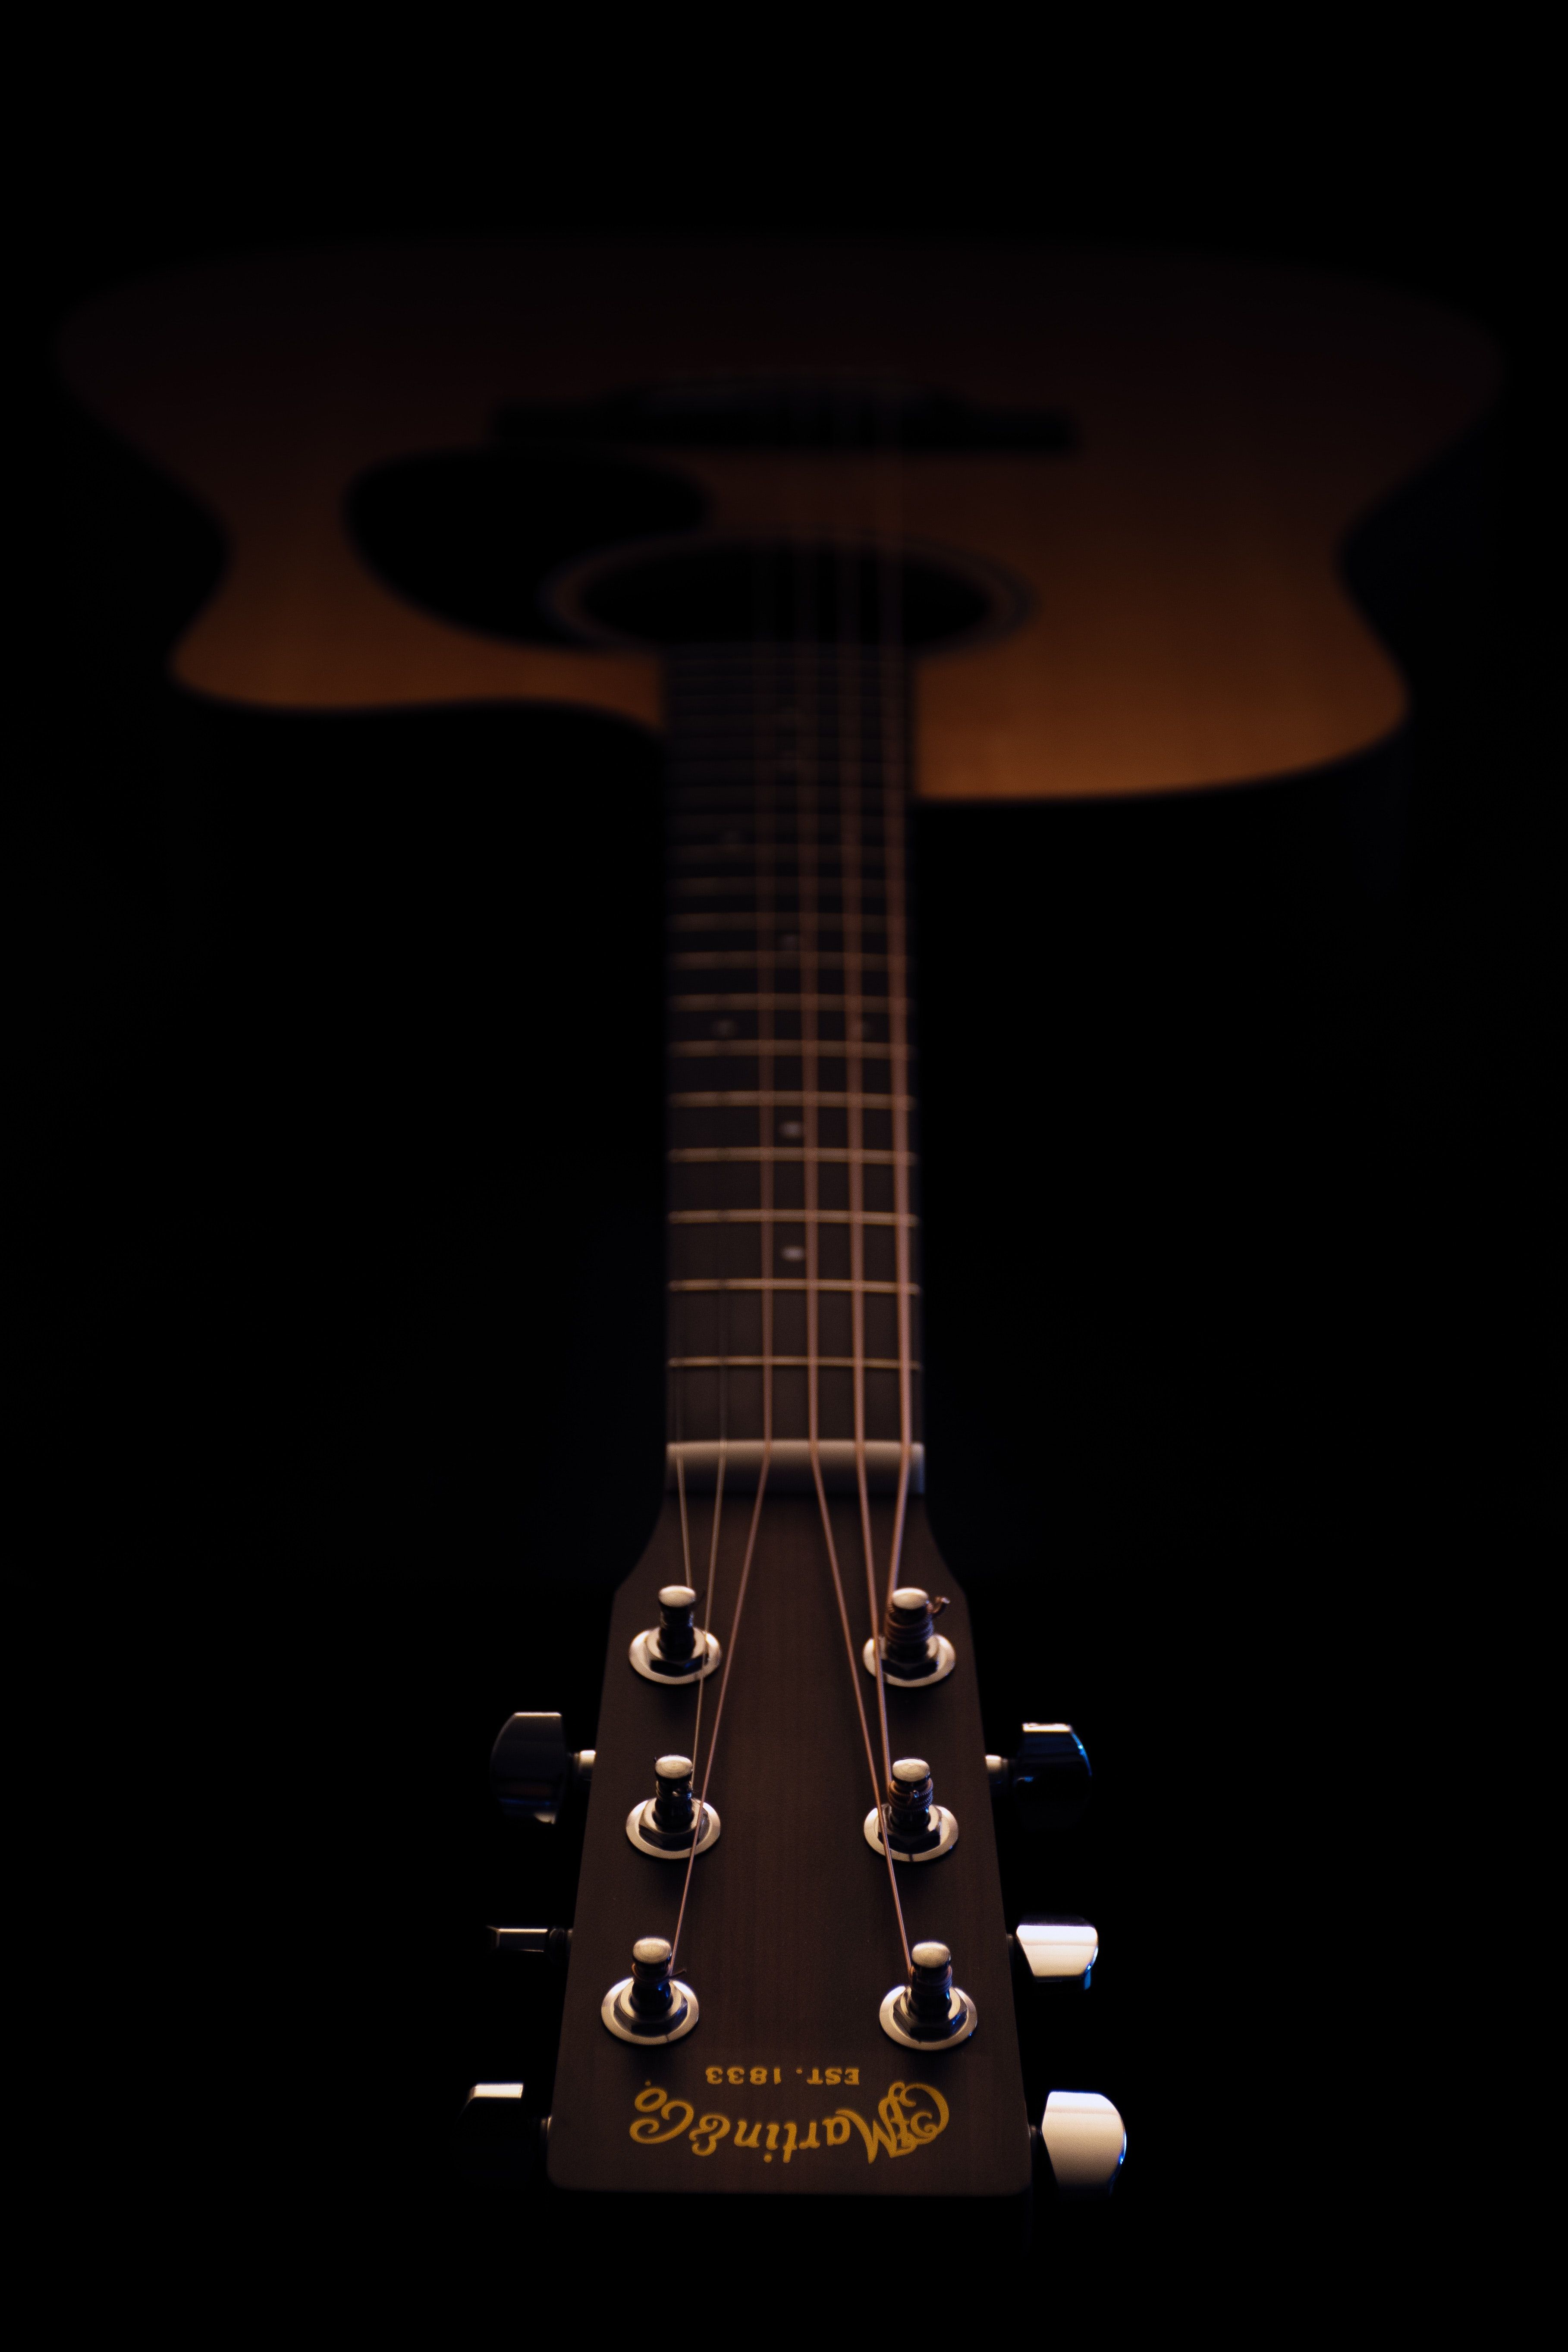 A guitar neck and headstock in the dark - Guitar